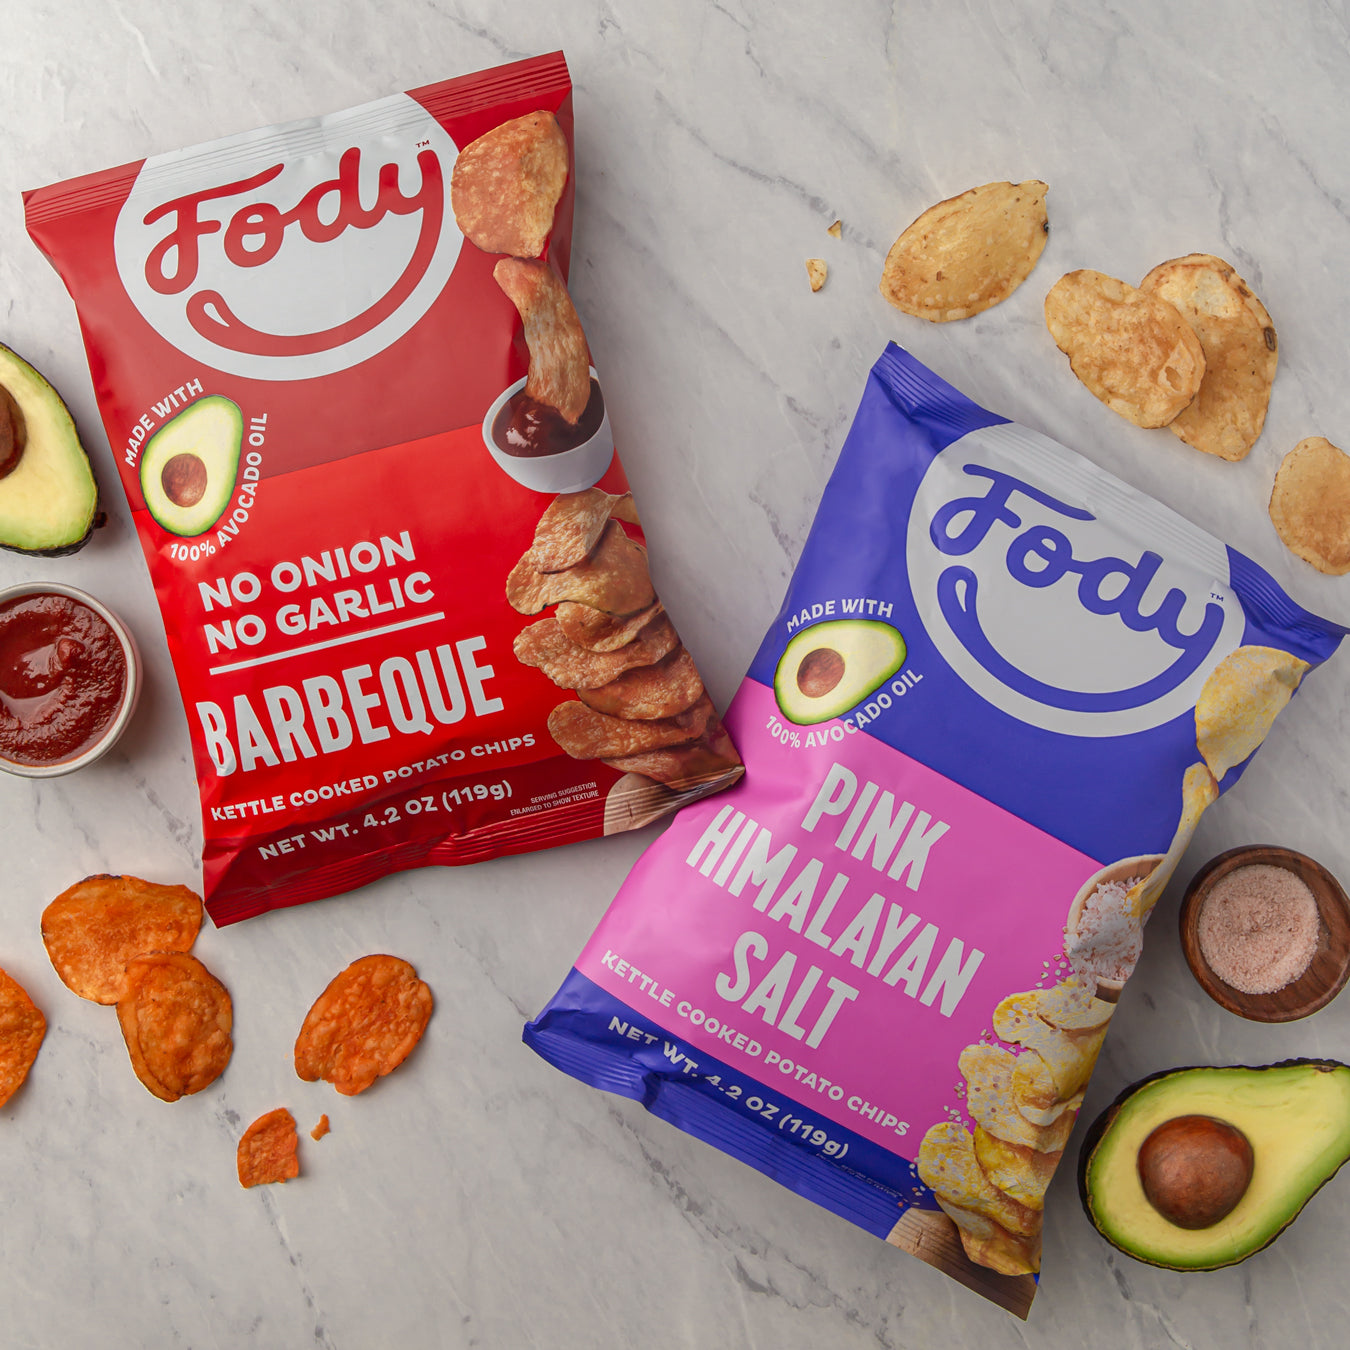 fody bbq kettle chips and pink himalayan salt kettle chips with avocado and bbq sauce